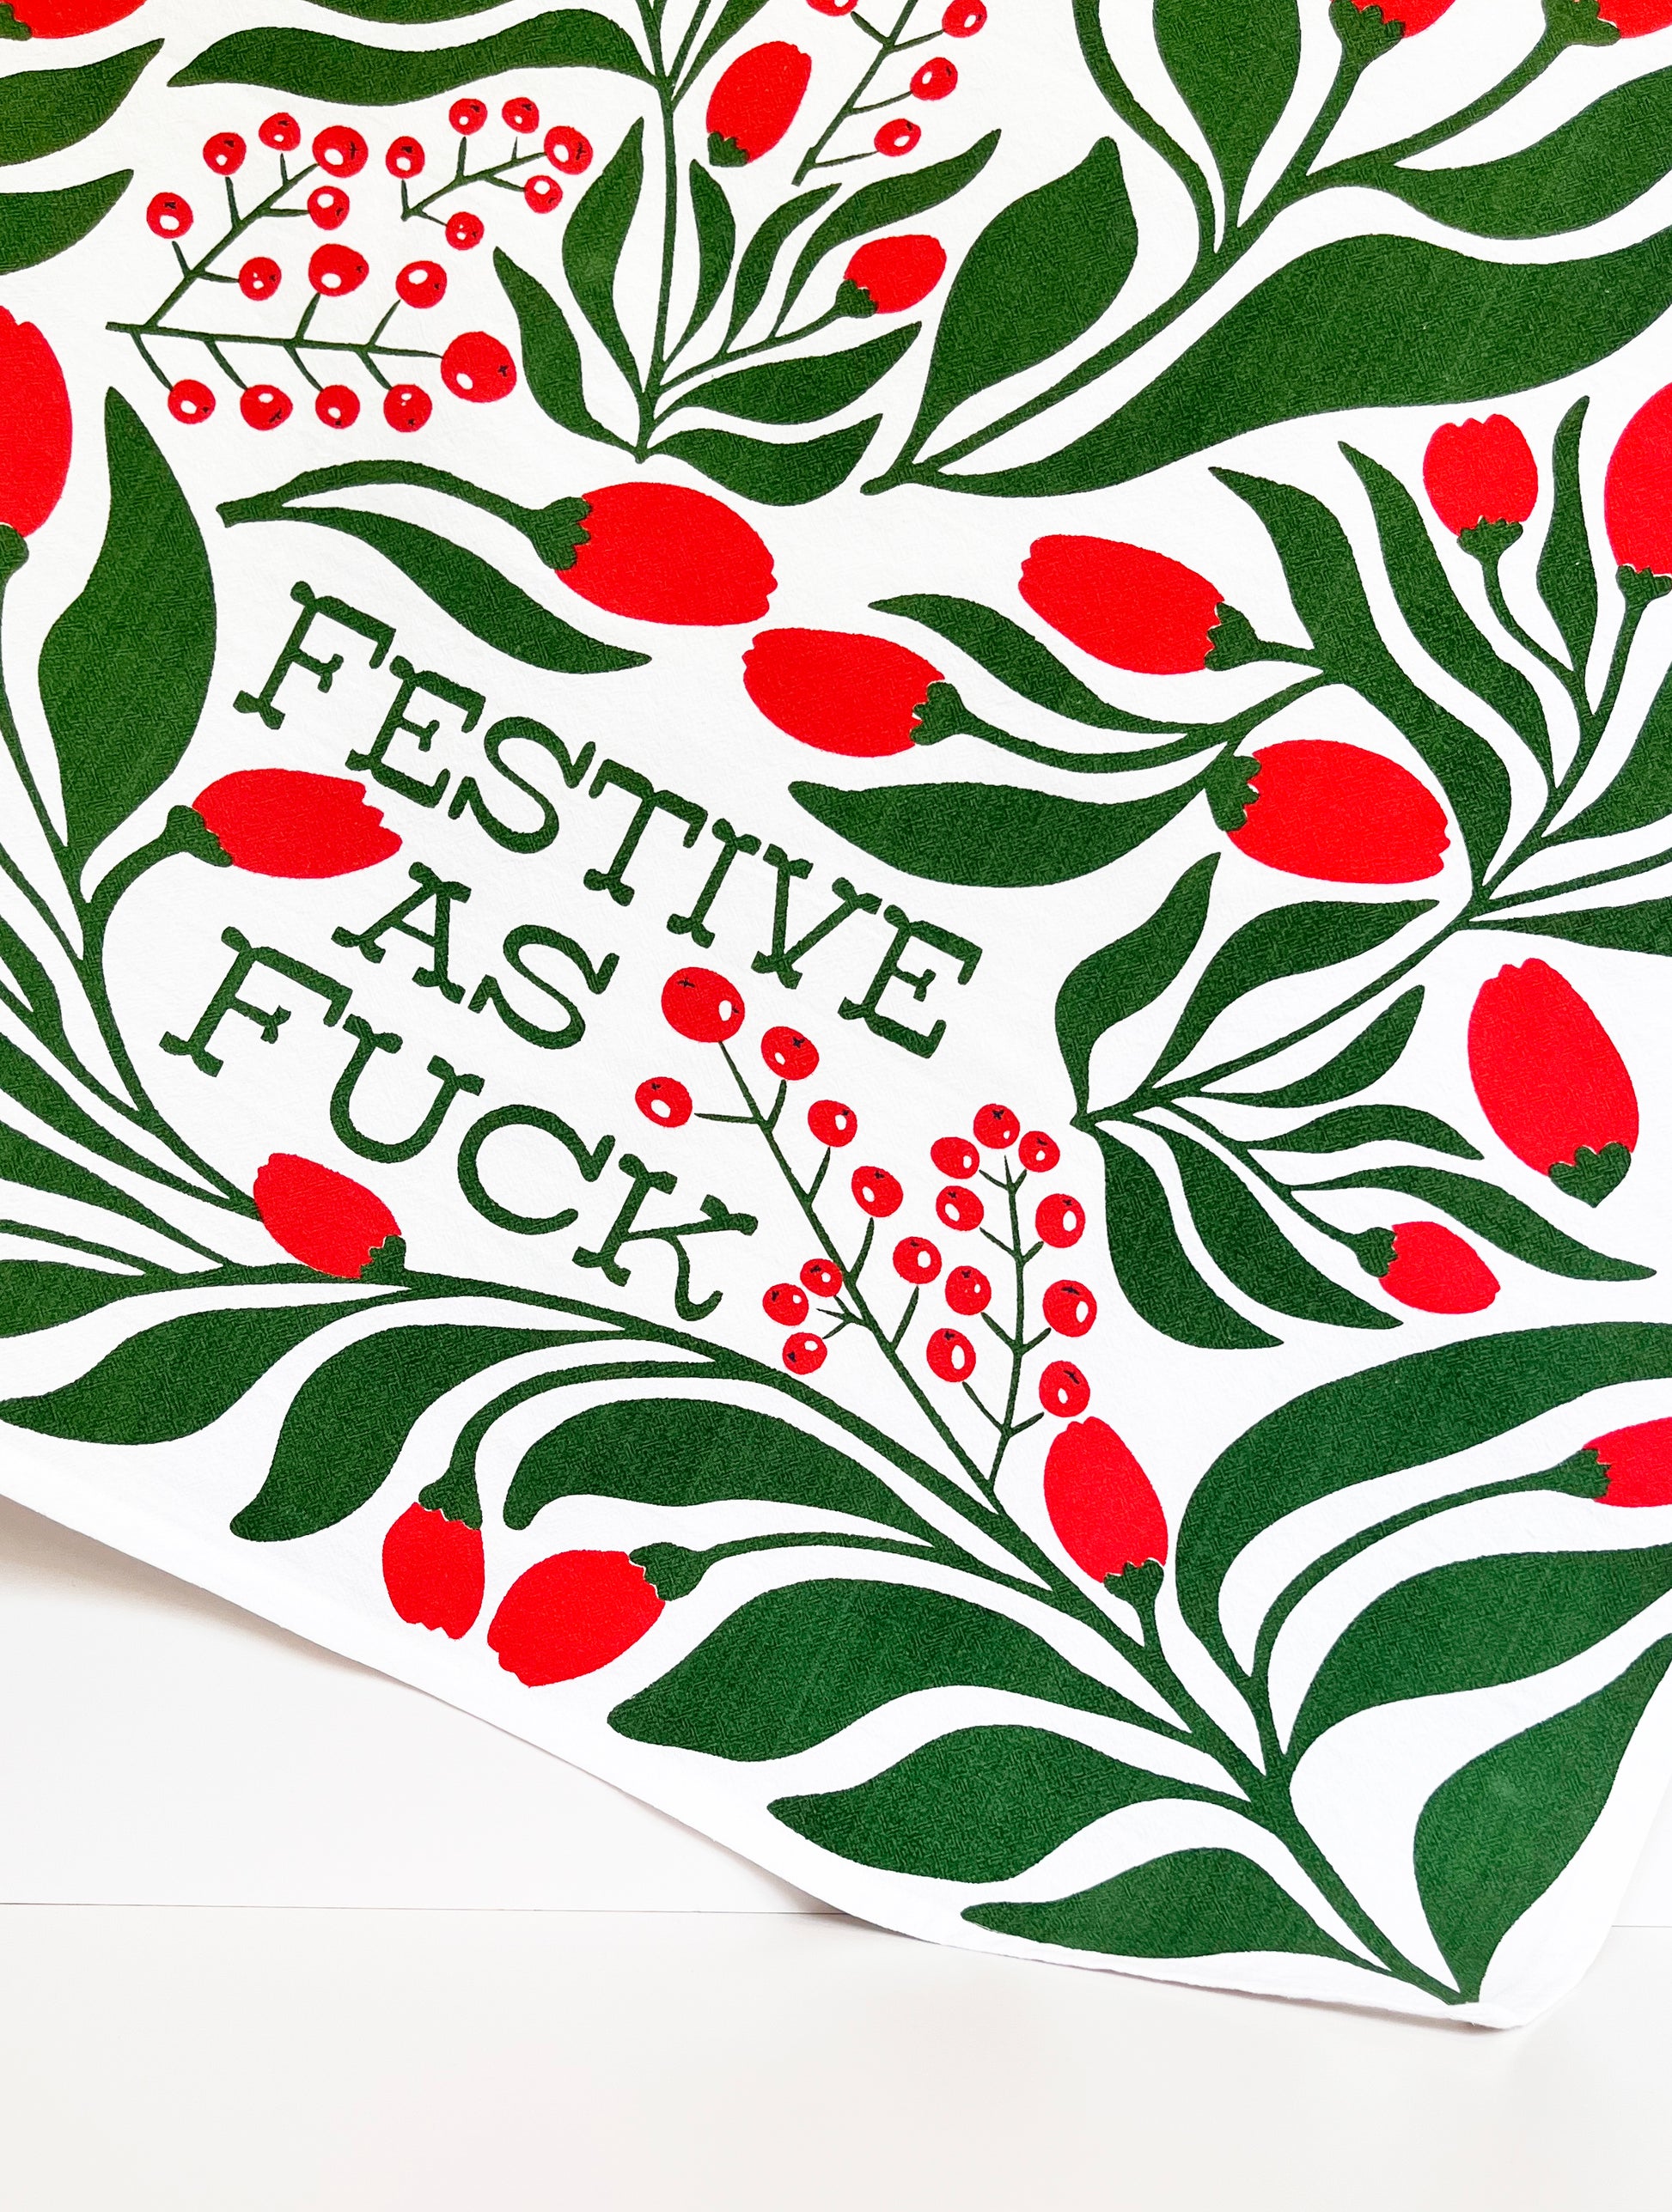 festive as fuck cotton dish towel decorative fun joyful happy bright color red green screen print modern flowers on trend coin laundry screen print holiday xmas christmas